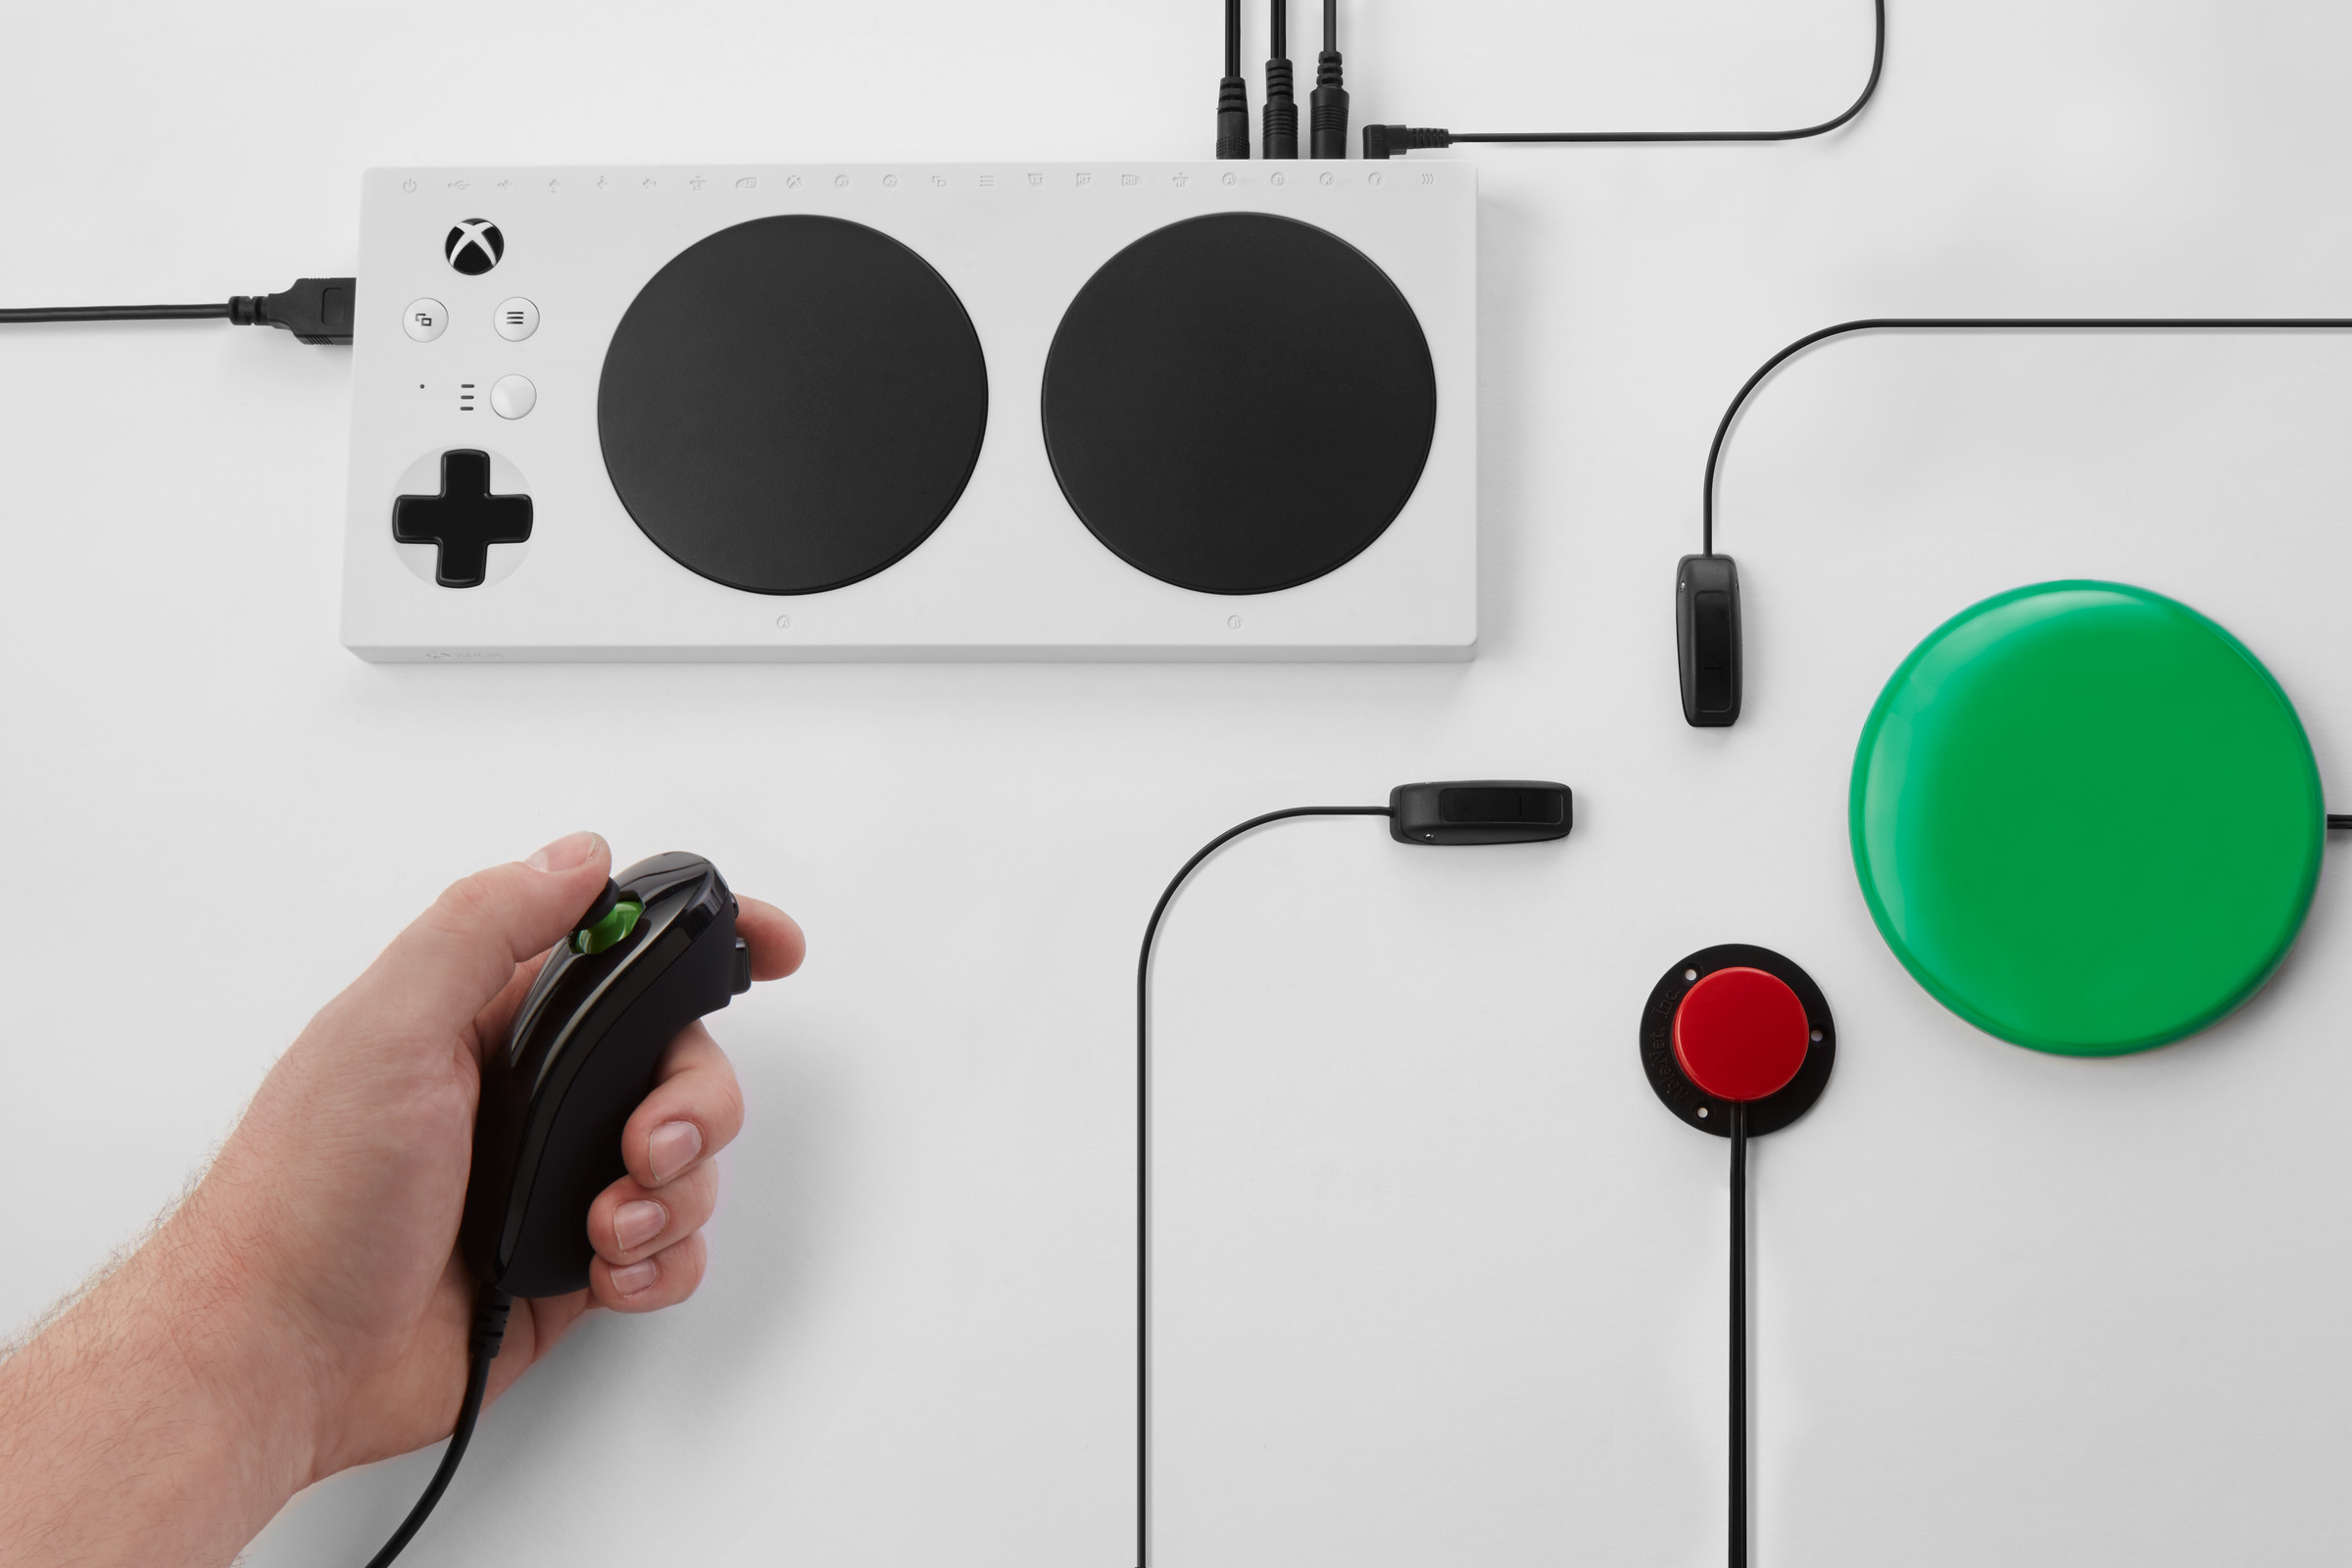 Microsoft’s Xbox Adaptive Controller is designed for players with disabilities